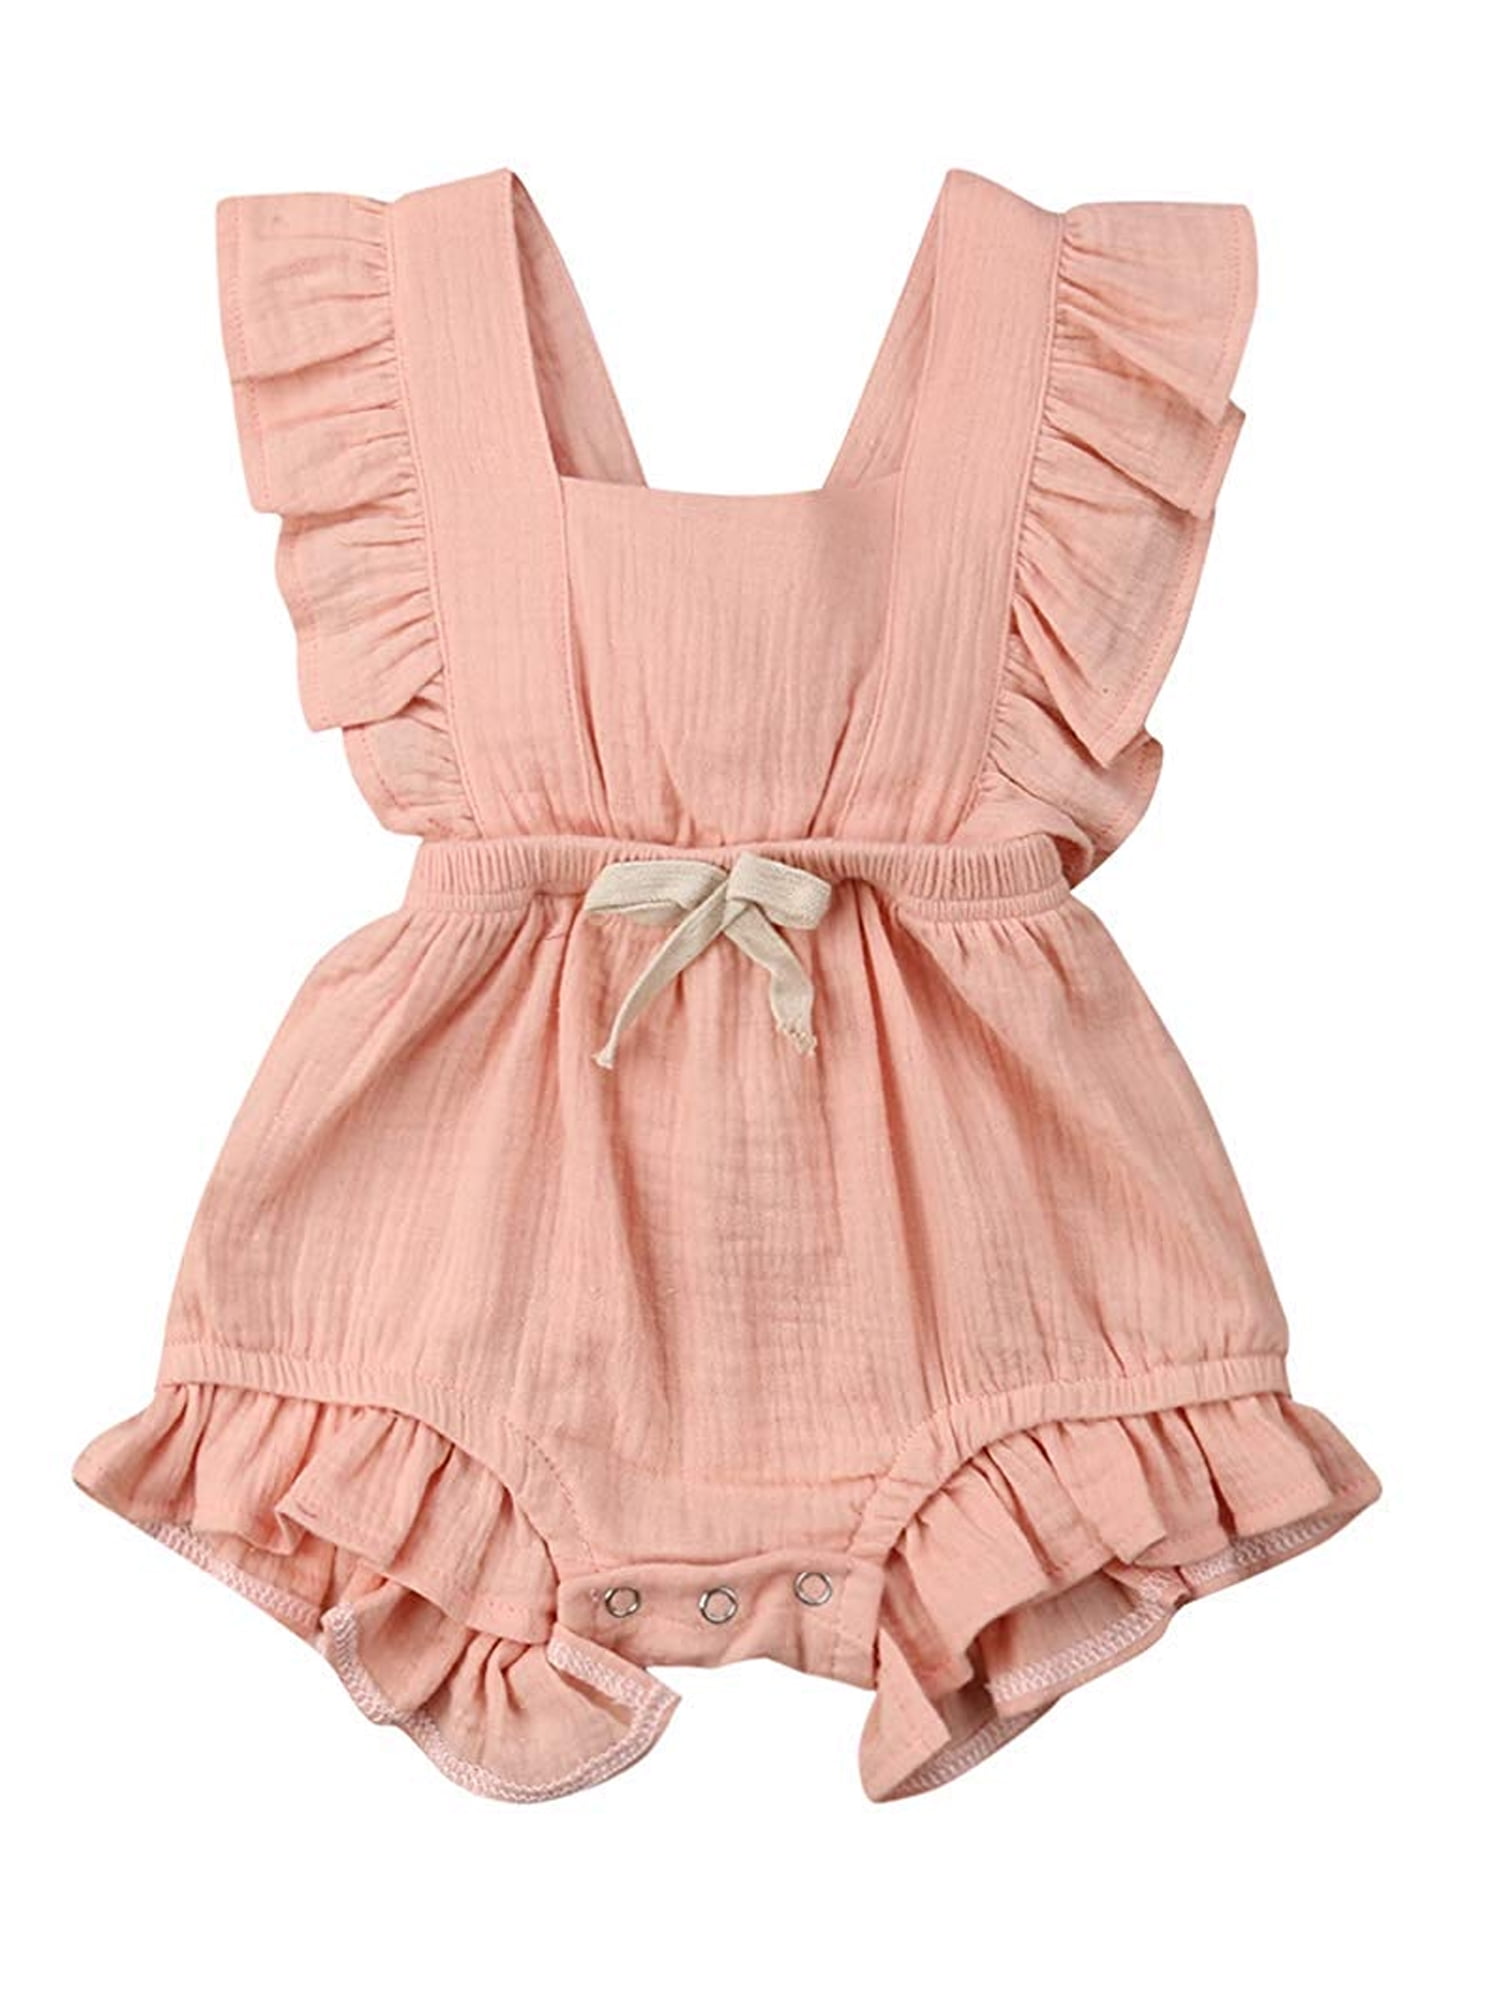 Baby Clothing,Summer Newborn Bodysuit,Baby Girls Solid Color Ruffles Backcross Outfits Infant Sleeveless Romper Jumpsuit Clothes for 3-24 Months 